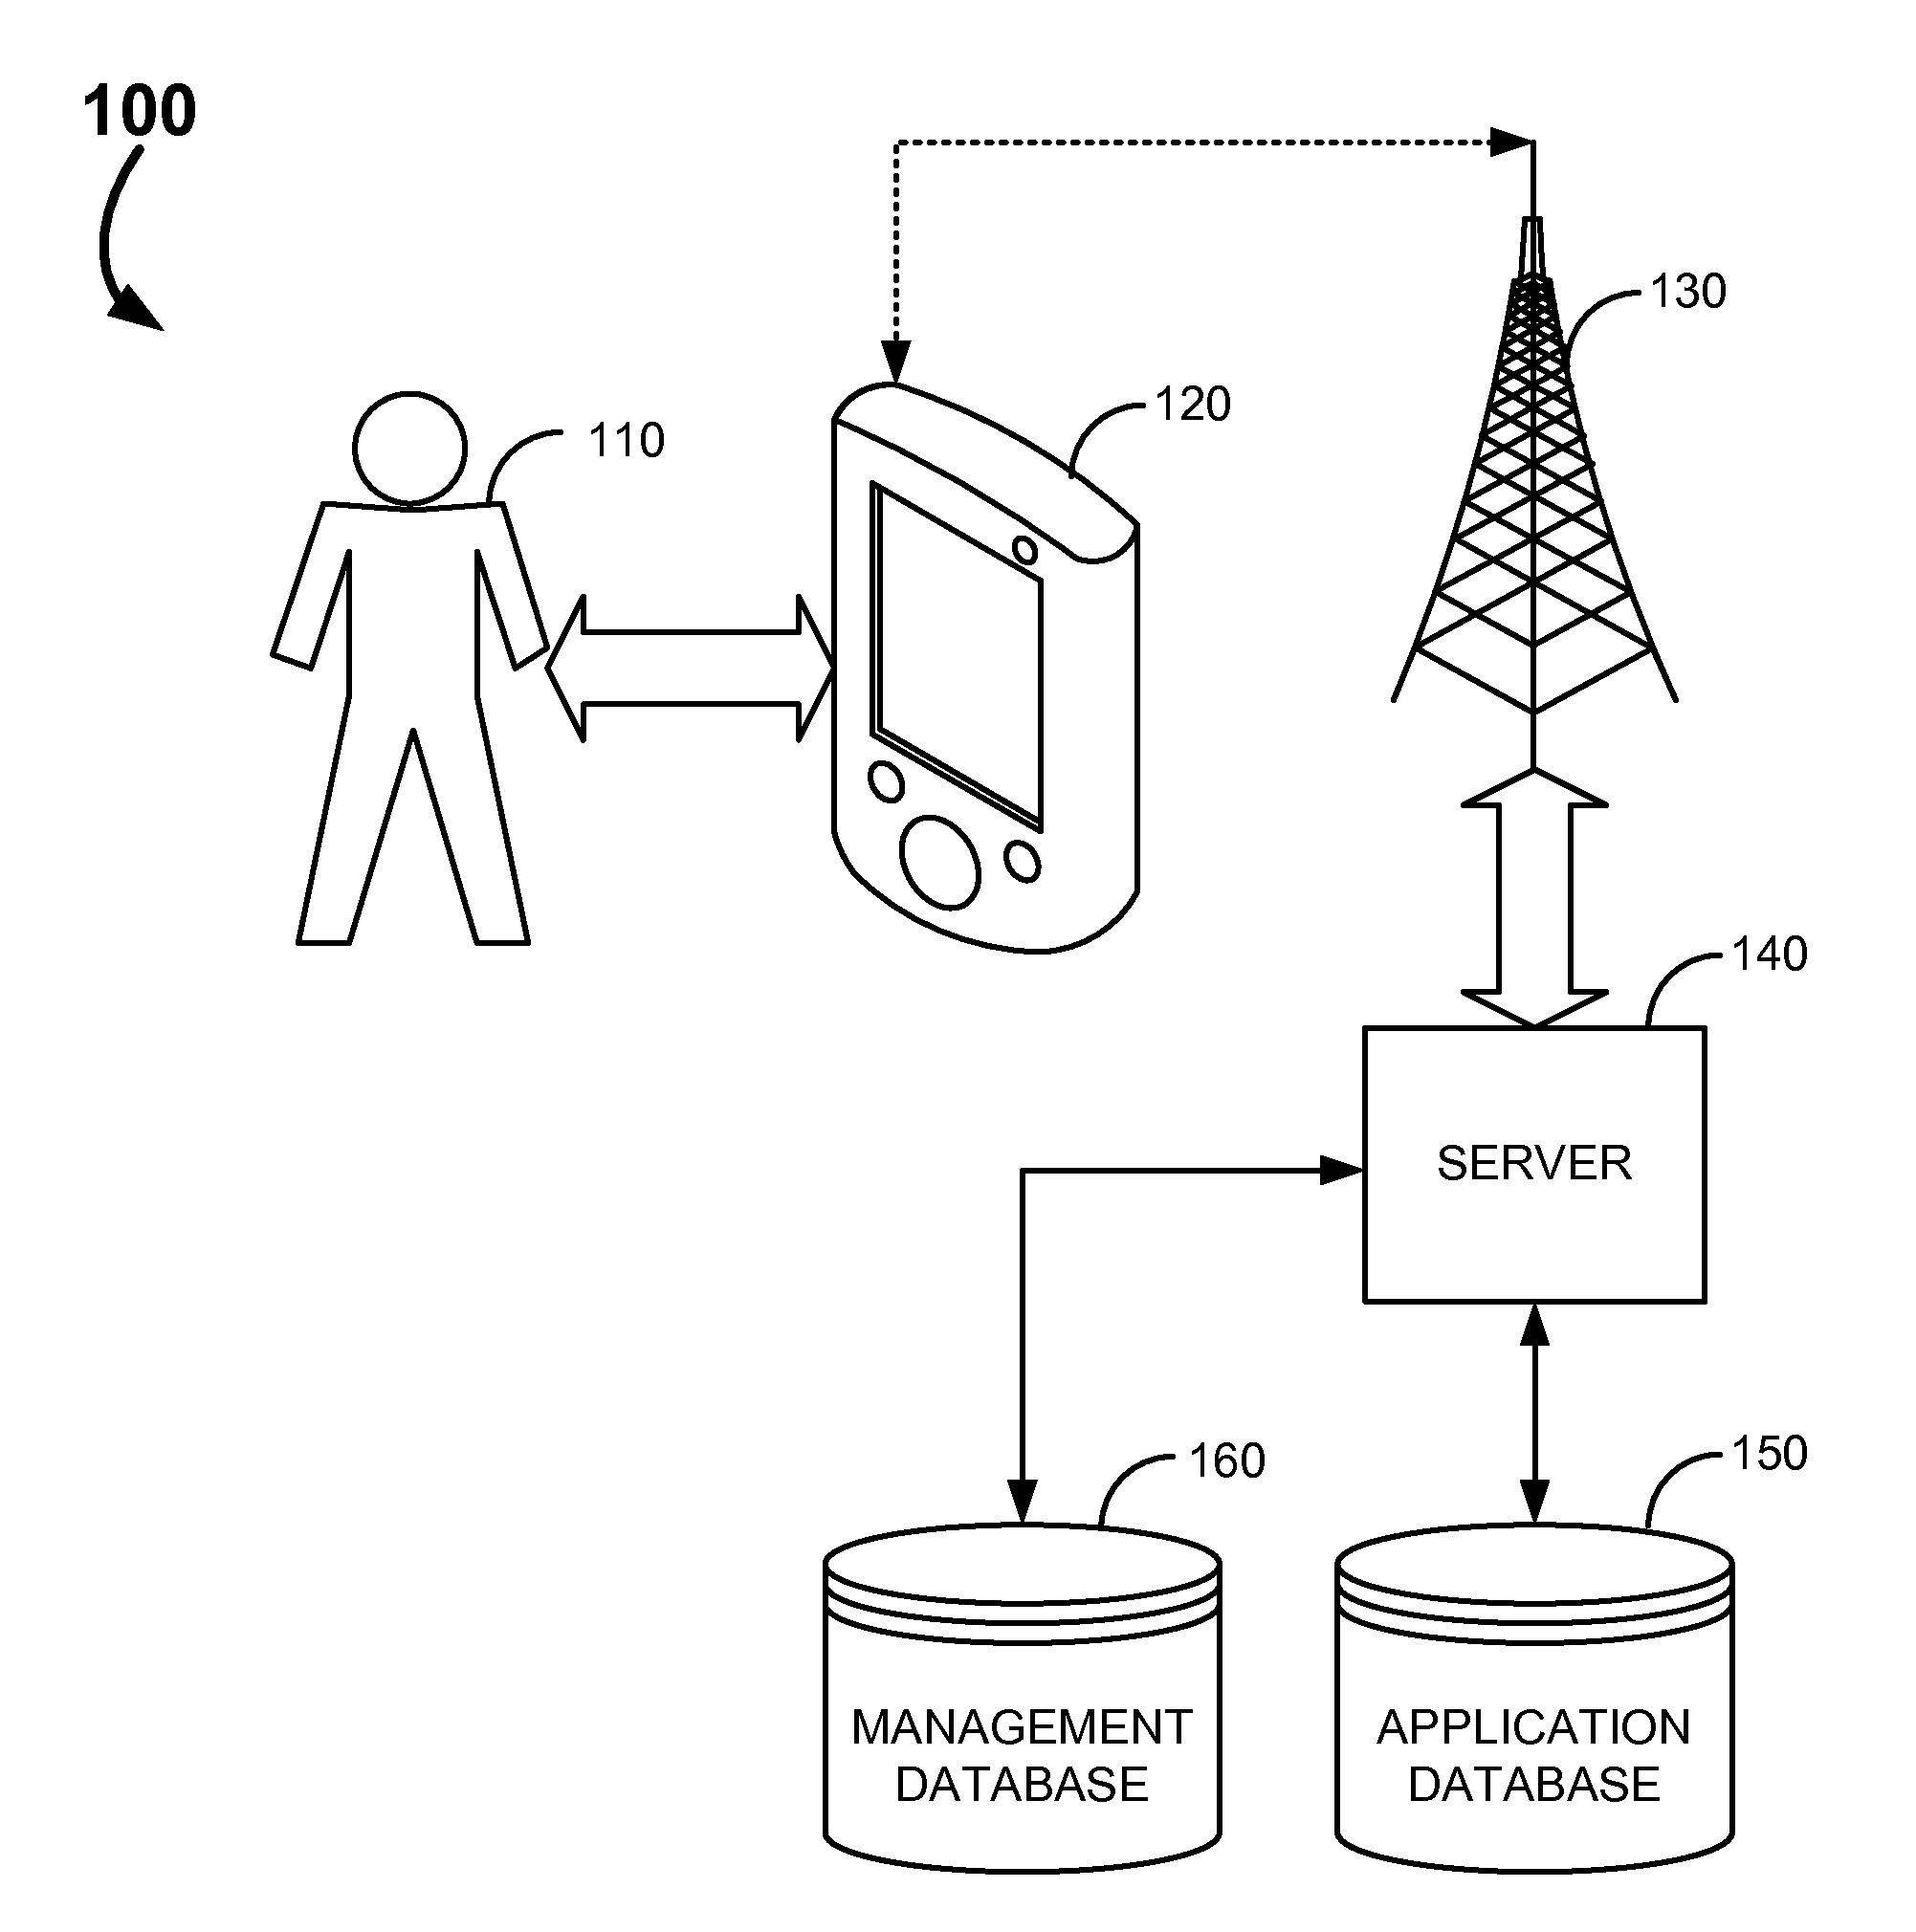 System and Methods to Store, Retrieve, Manage, Augment and Monitor Applications on Appliances